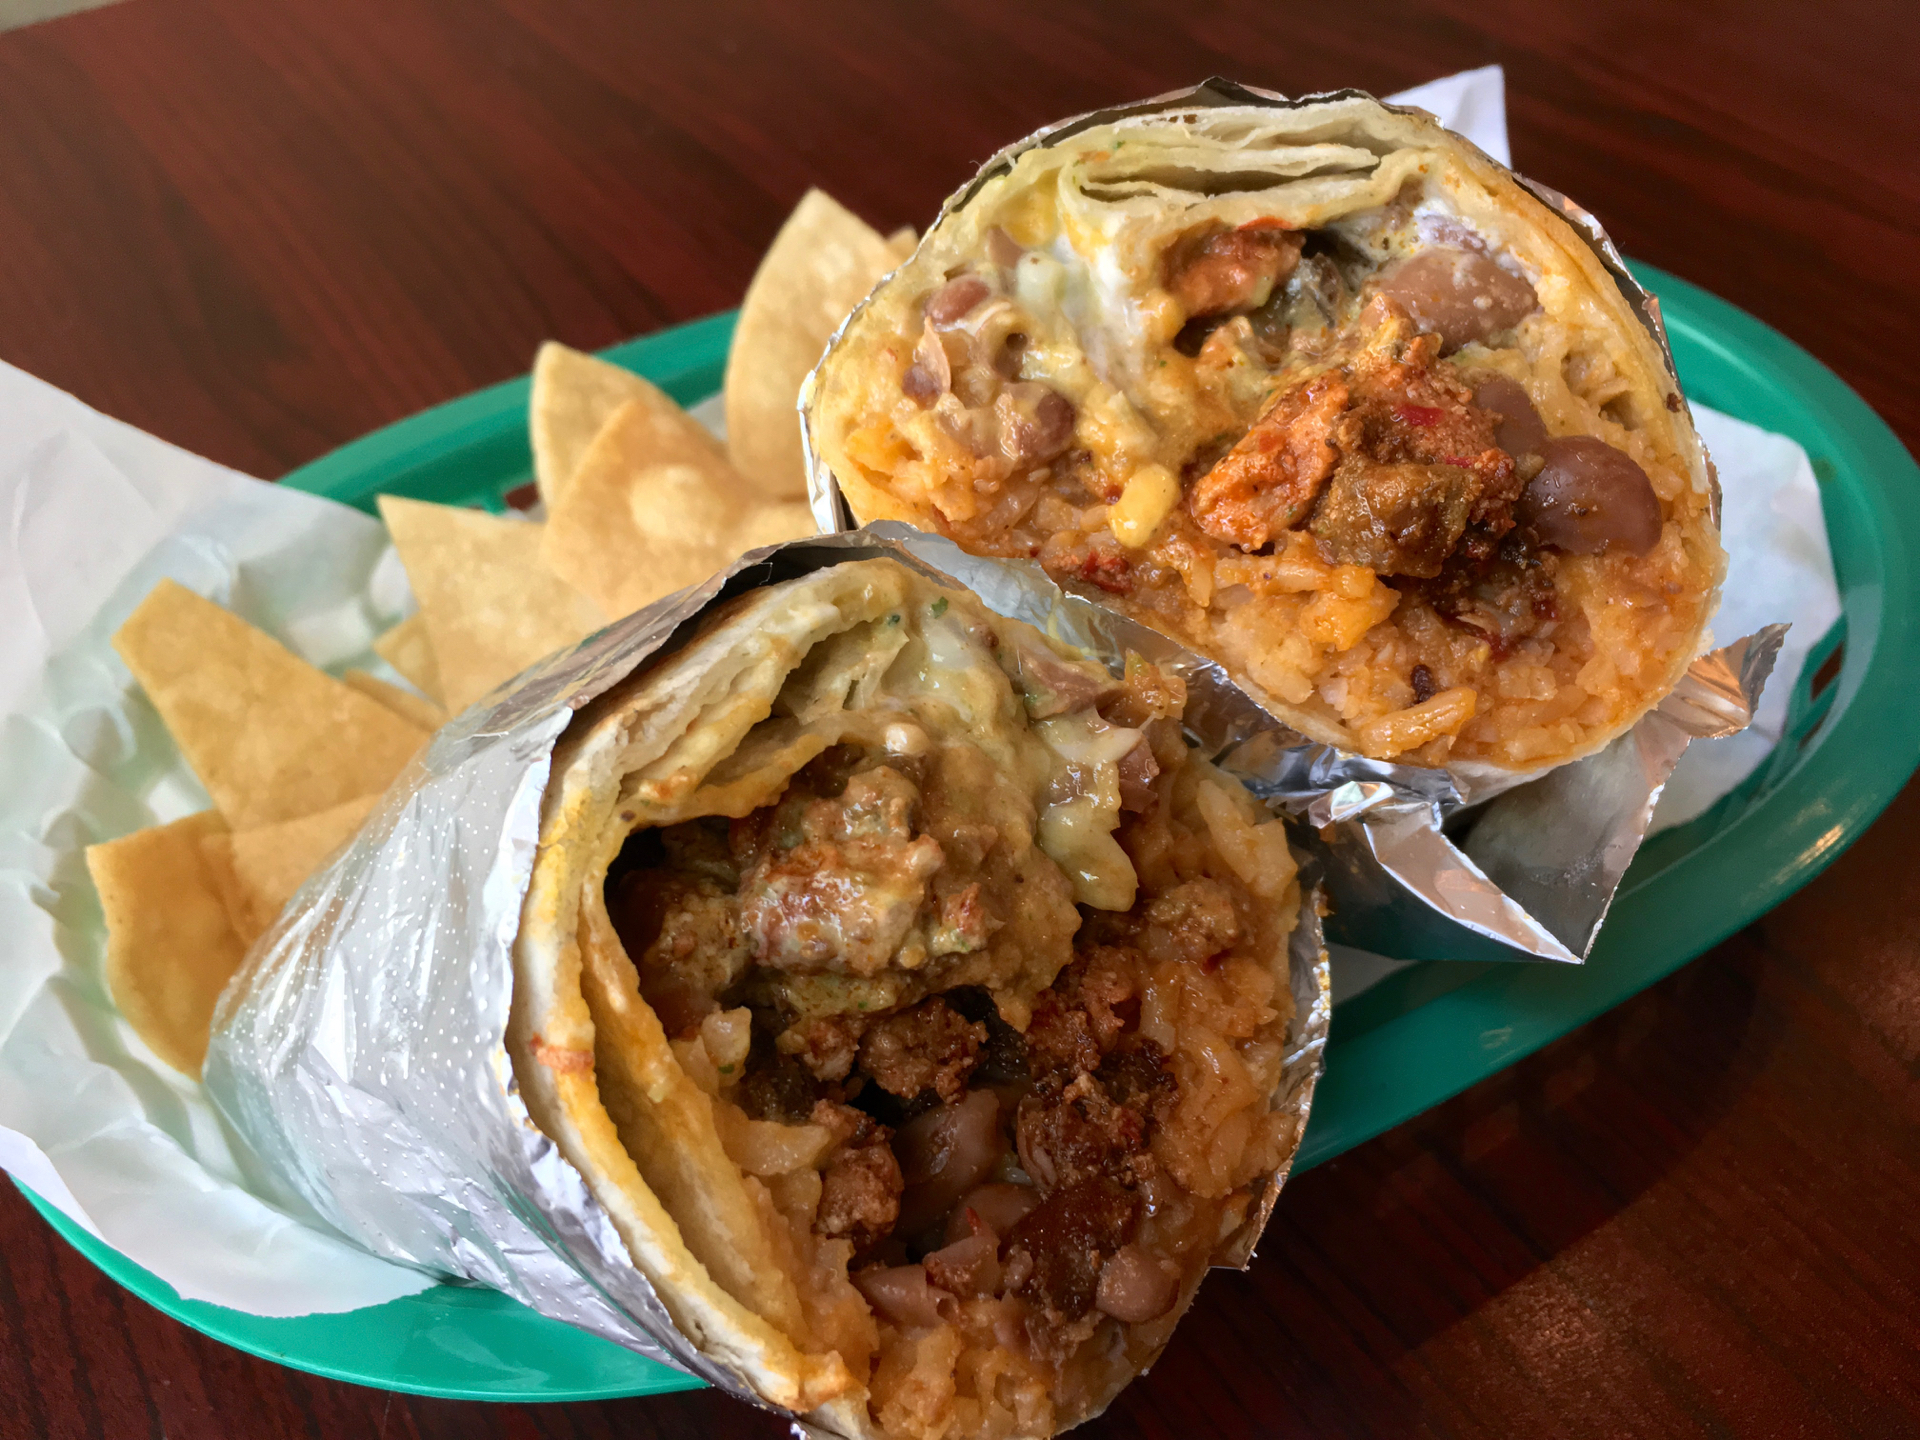 A super burrito with al pastor at Angelou’s Mexican Grill.